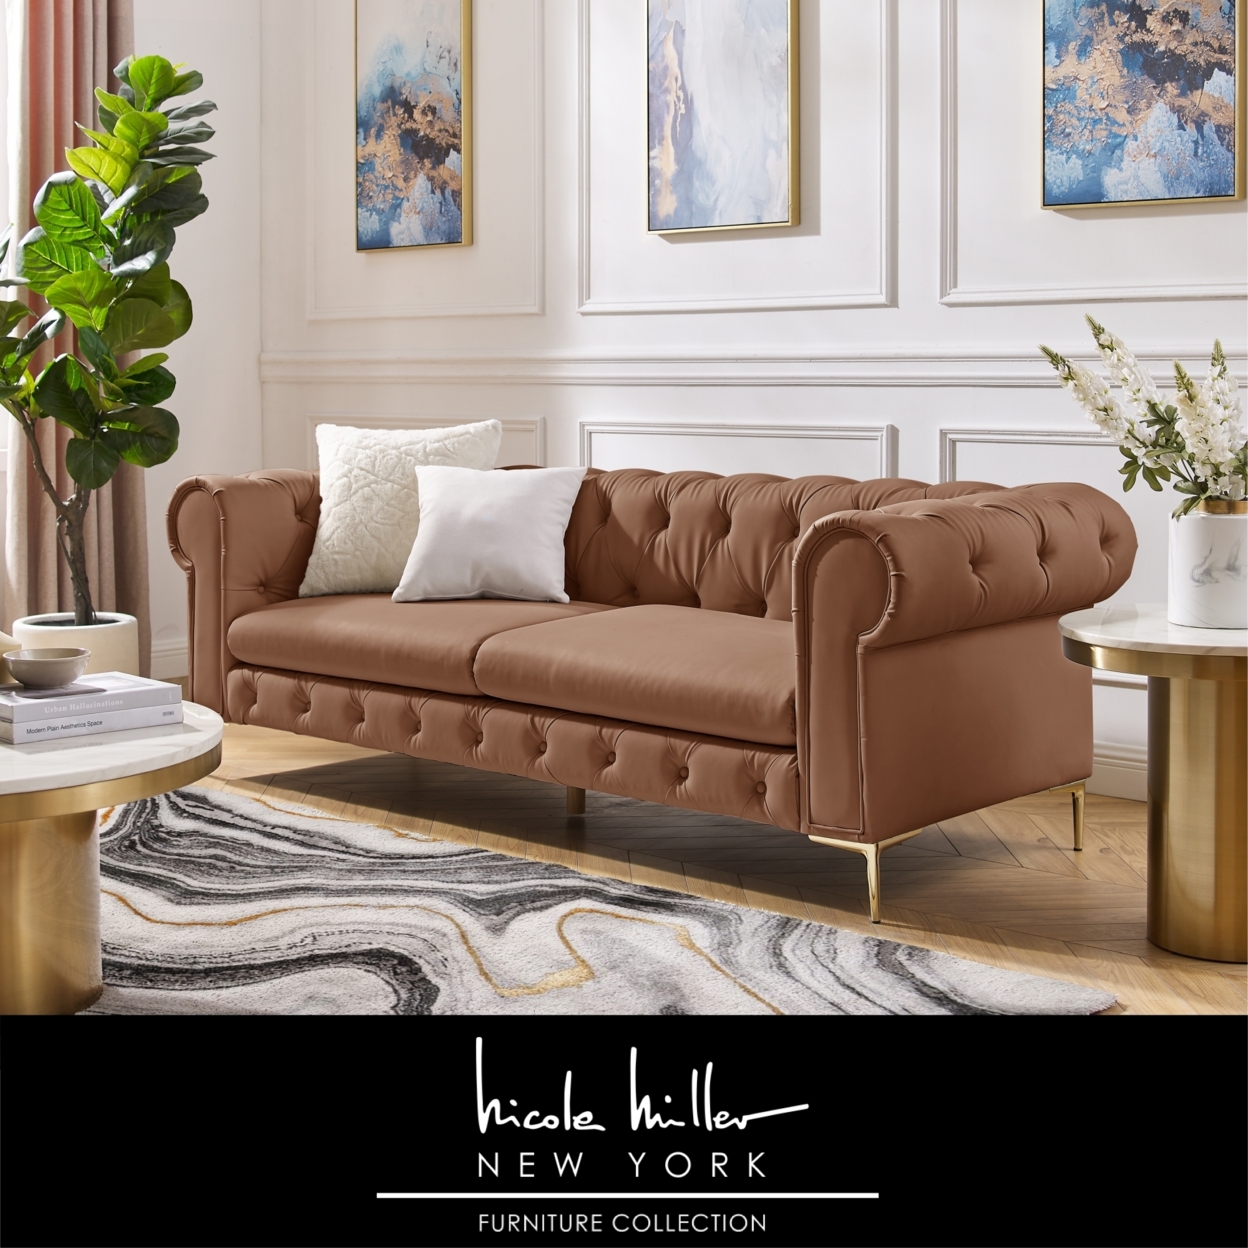 Laci Sofa - Button Tufted, 3 Seat - Rolled Arms - Y Leg, Sinuous Springs - Brown